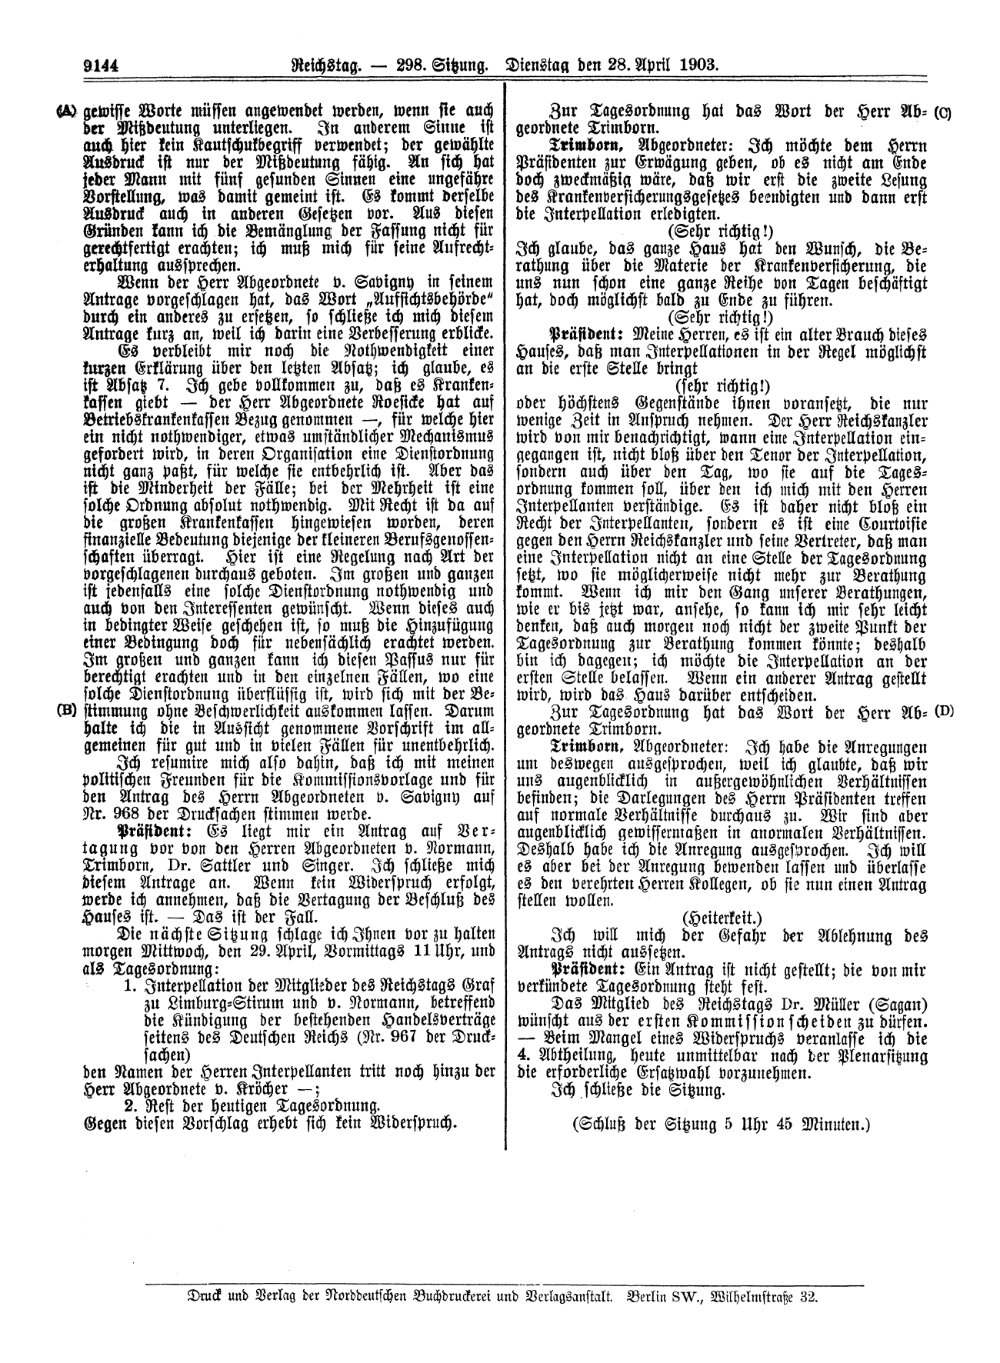 Scan of page 9144